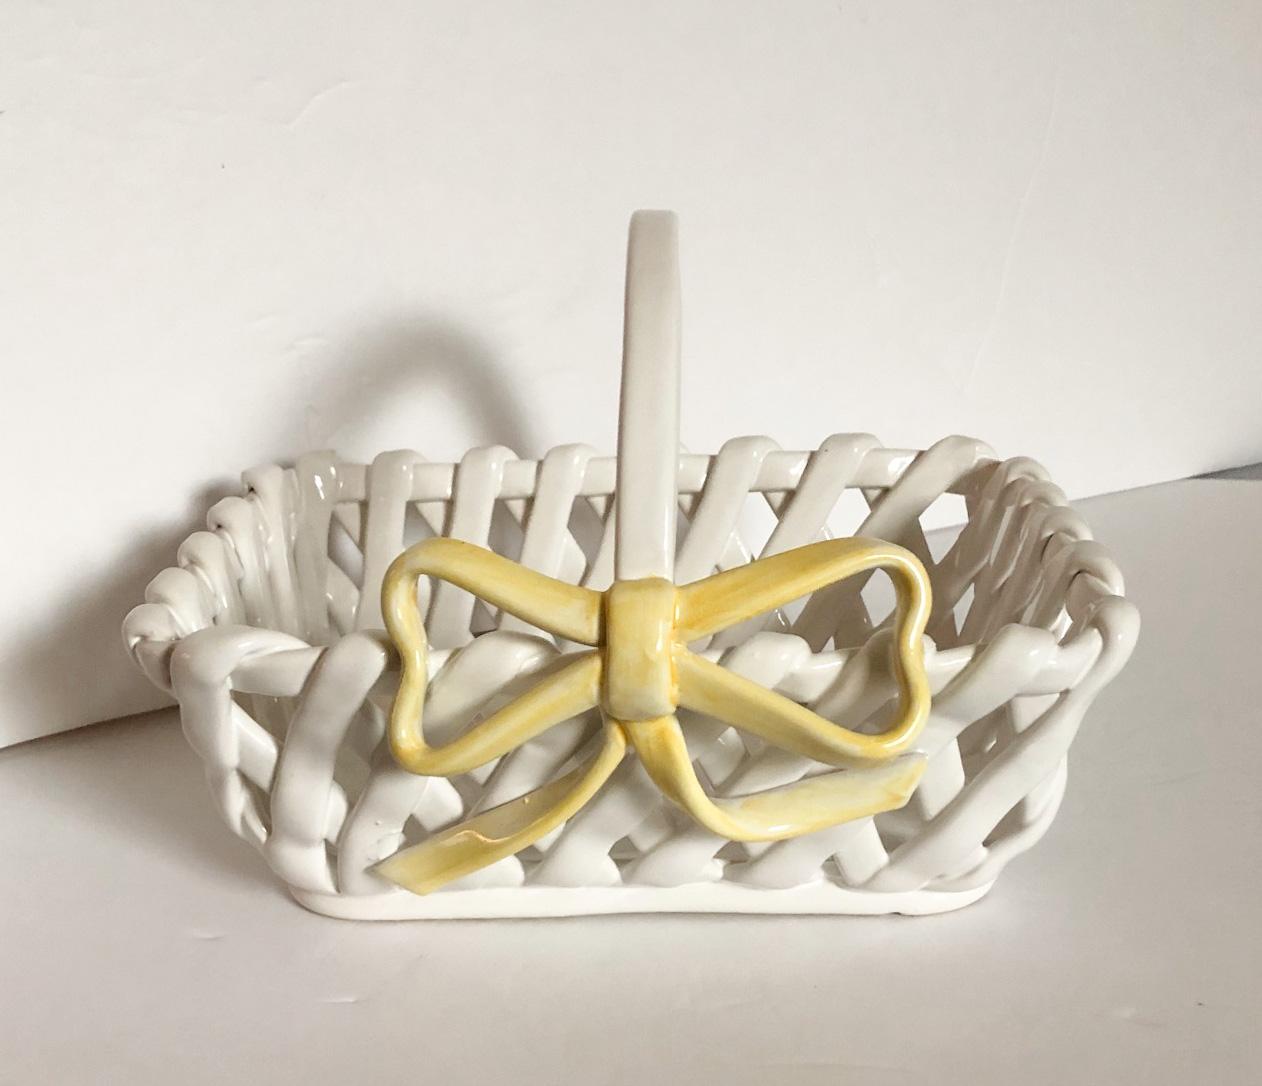 White ceramic woven basket with a yellow bow on the front, made in Portugal.